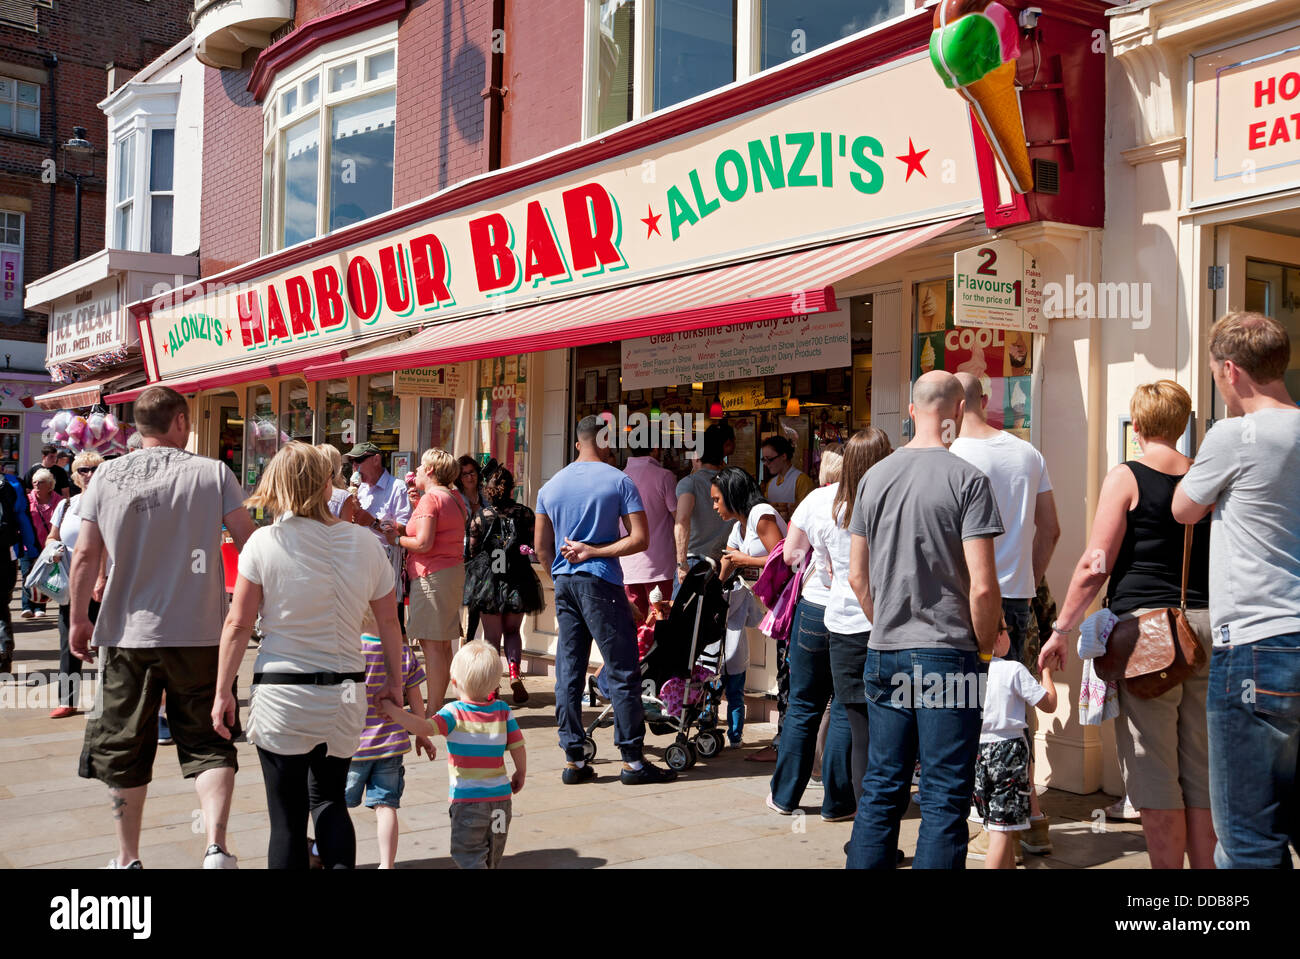 People tourists visitors walking by Harbour Bar cafe in summer Scarborough seafront resort North Yorkshire England UK United Kingdom GB Great Britain Stock Photo